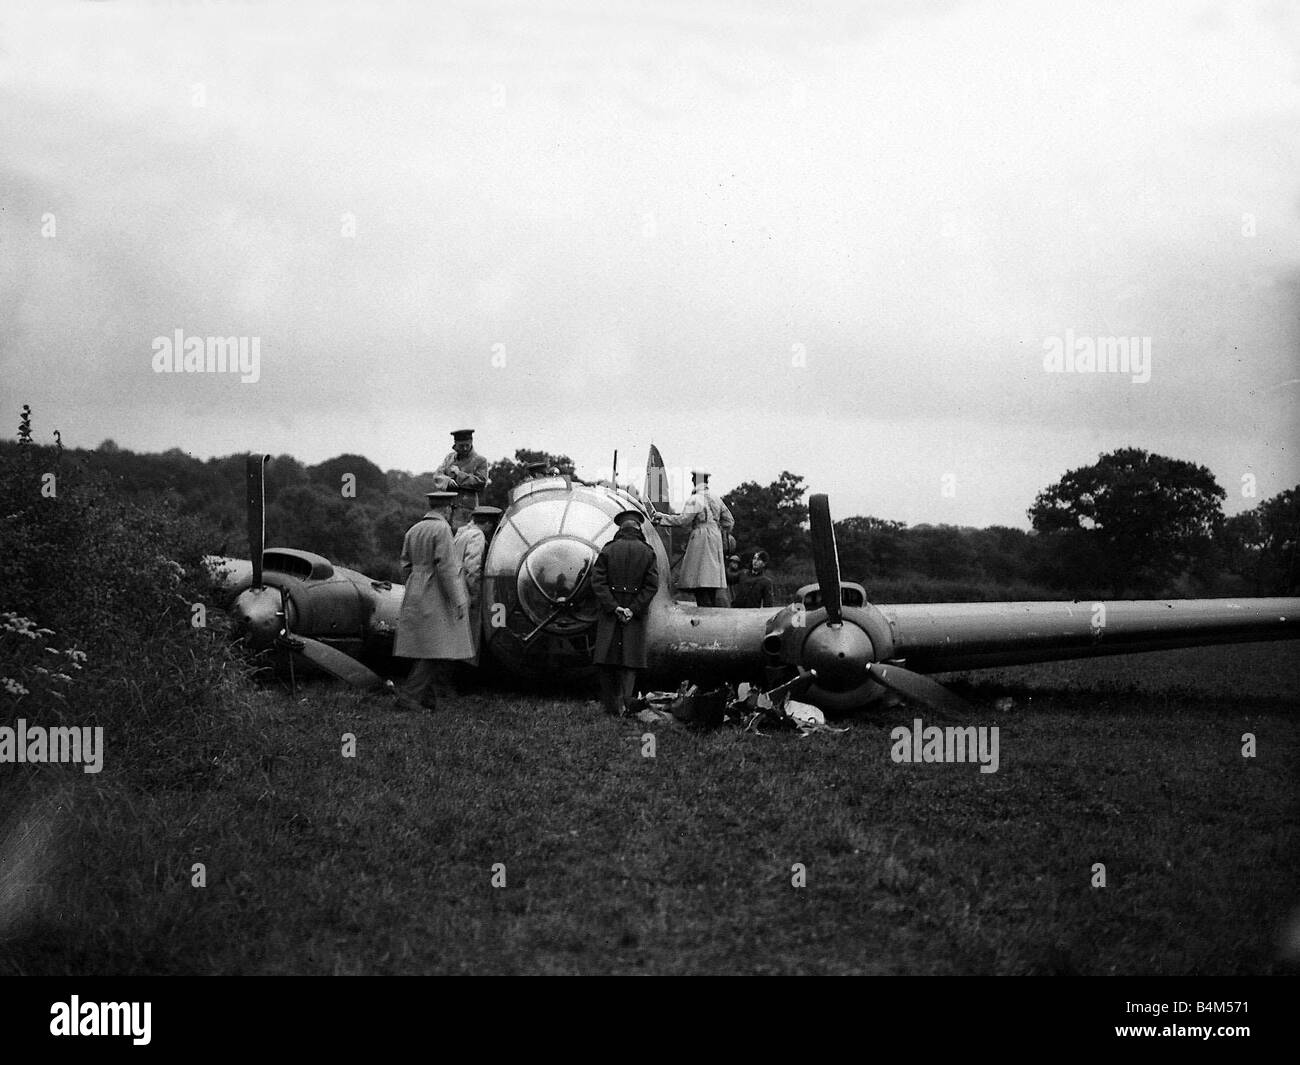 Heinkel 111 crash The Battle of Britain did not start in earnest until August of 1940 However some German raids took place before this but the German planes found themselves heavily outmatched by the British fighter aircraft such as the Hurricane and the Spitfire In August the Luftwaffe began to concentrate on bombing RAF irfields and the desperate battle for control of the skies over England began to look like it might turn their way Stock Photo